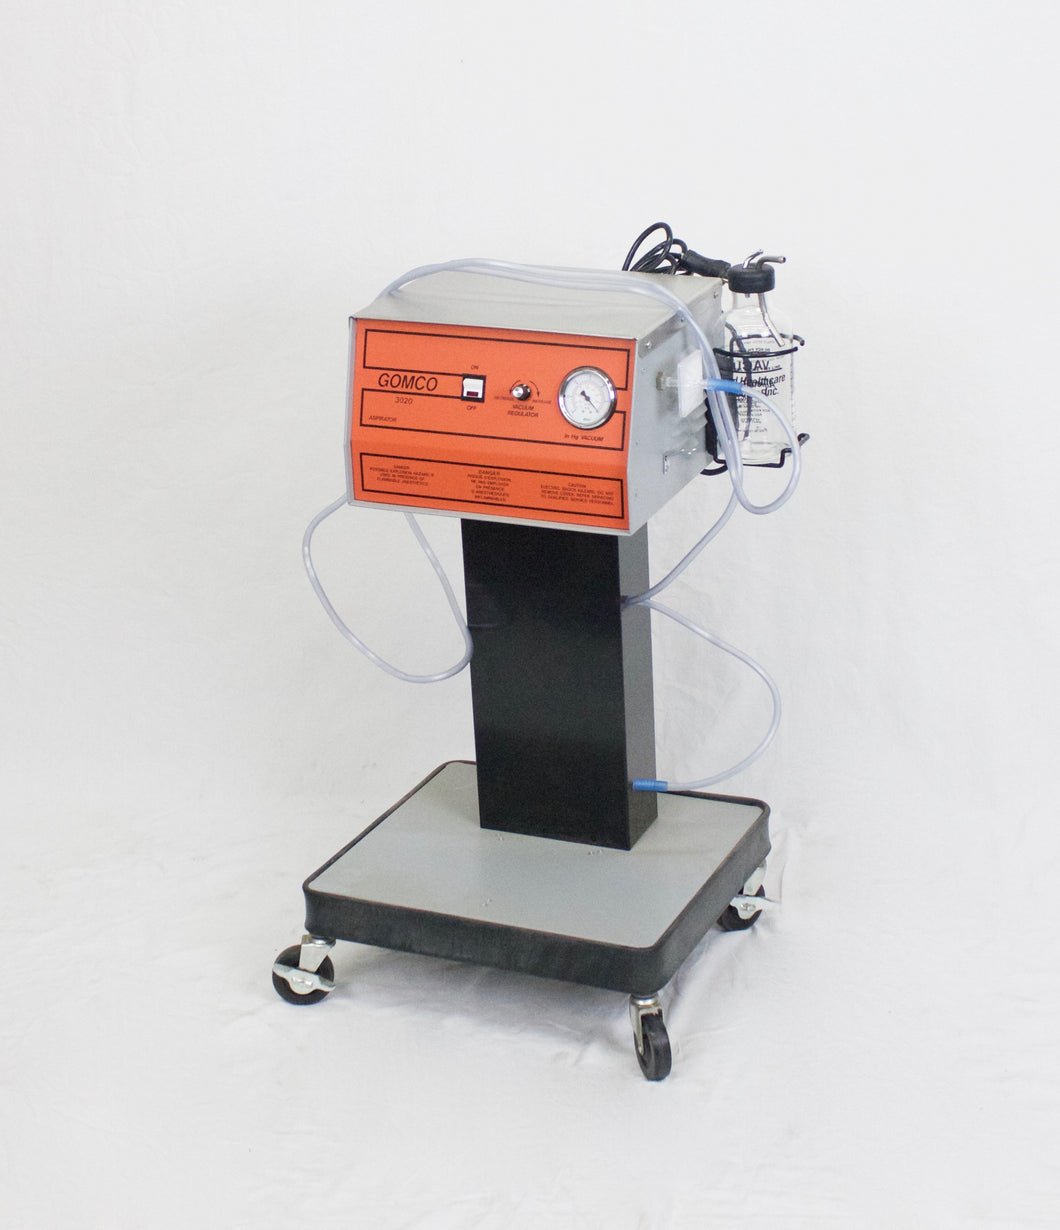 Gomco 3020 Surgical Suction Machine